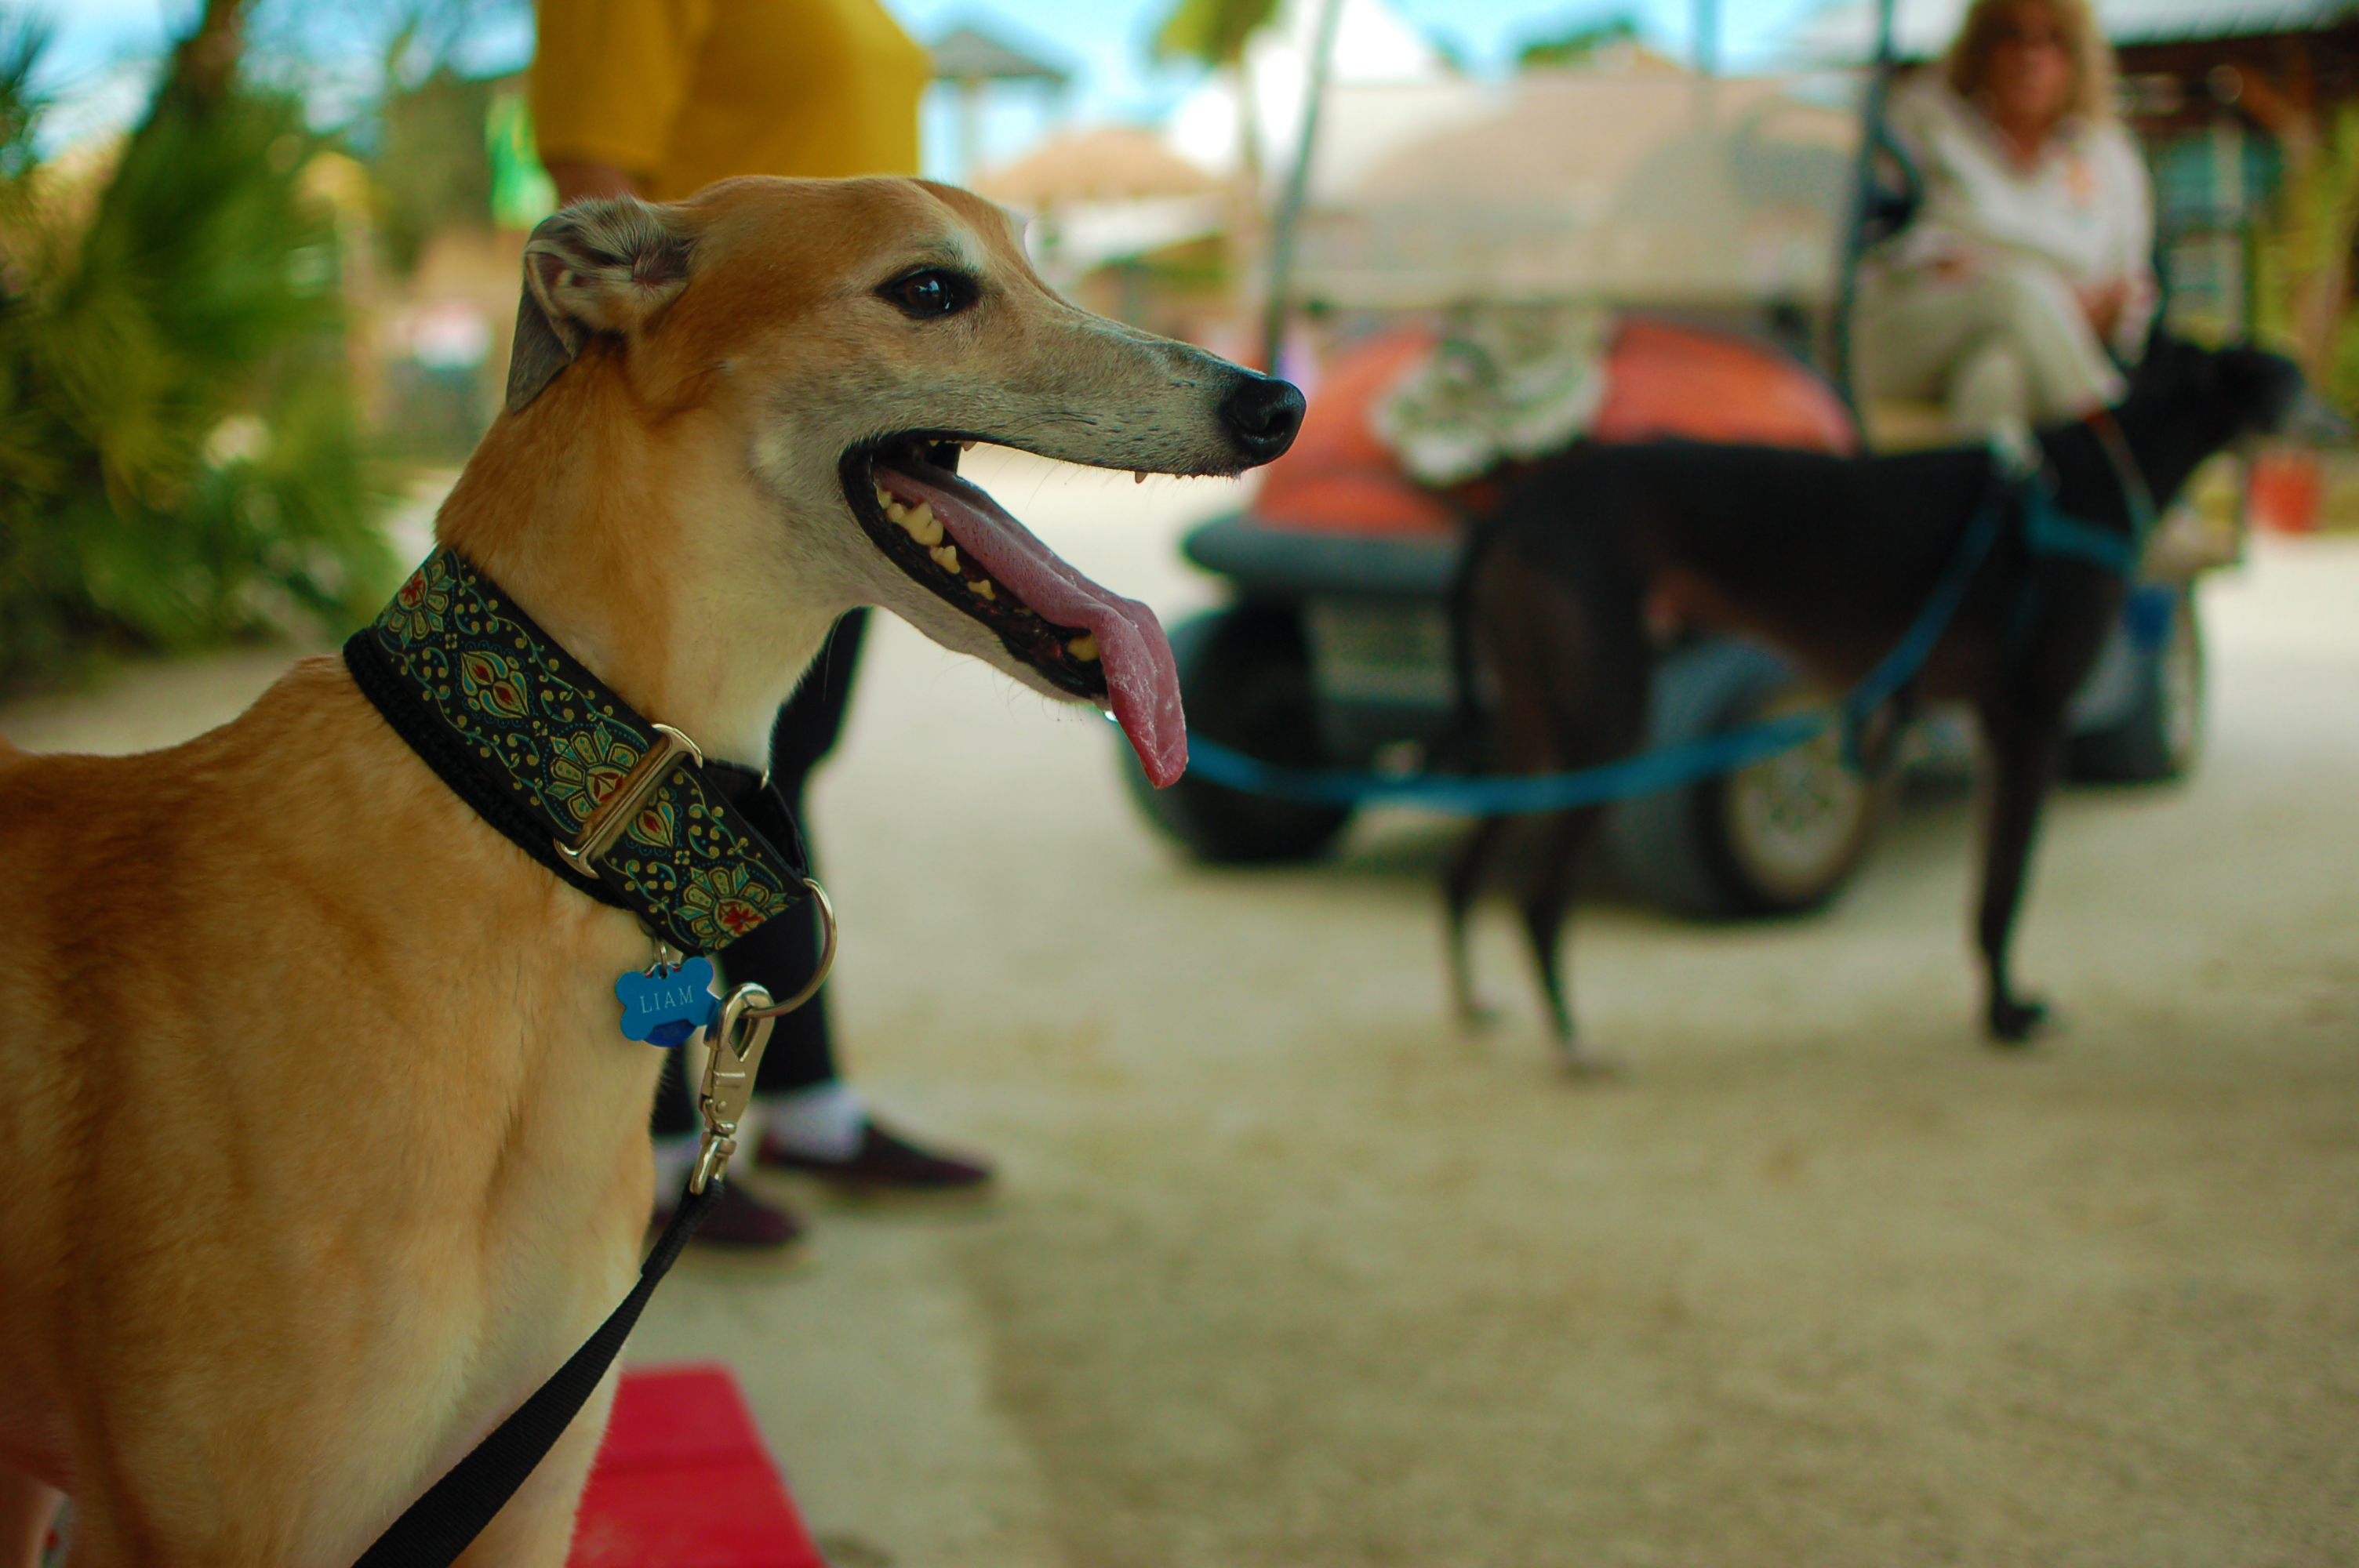 Racing Dog Retirement Project makes adopting greyhounds accessible